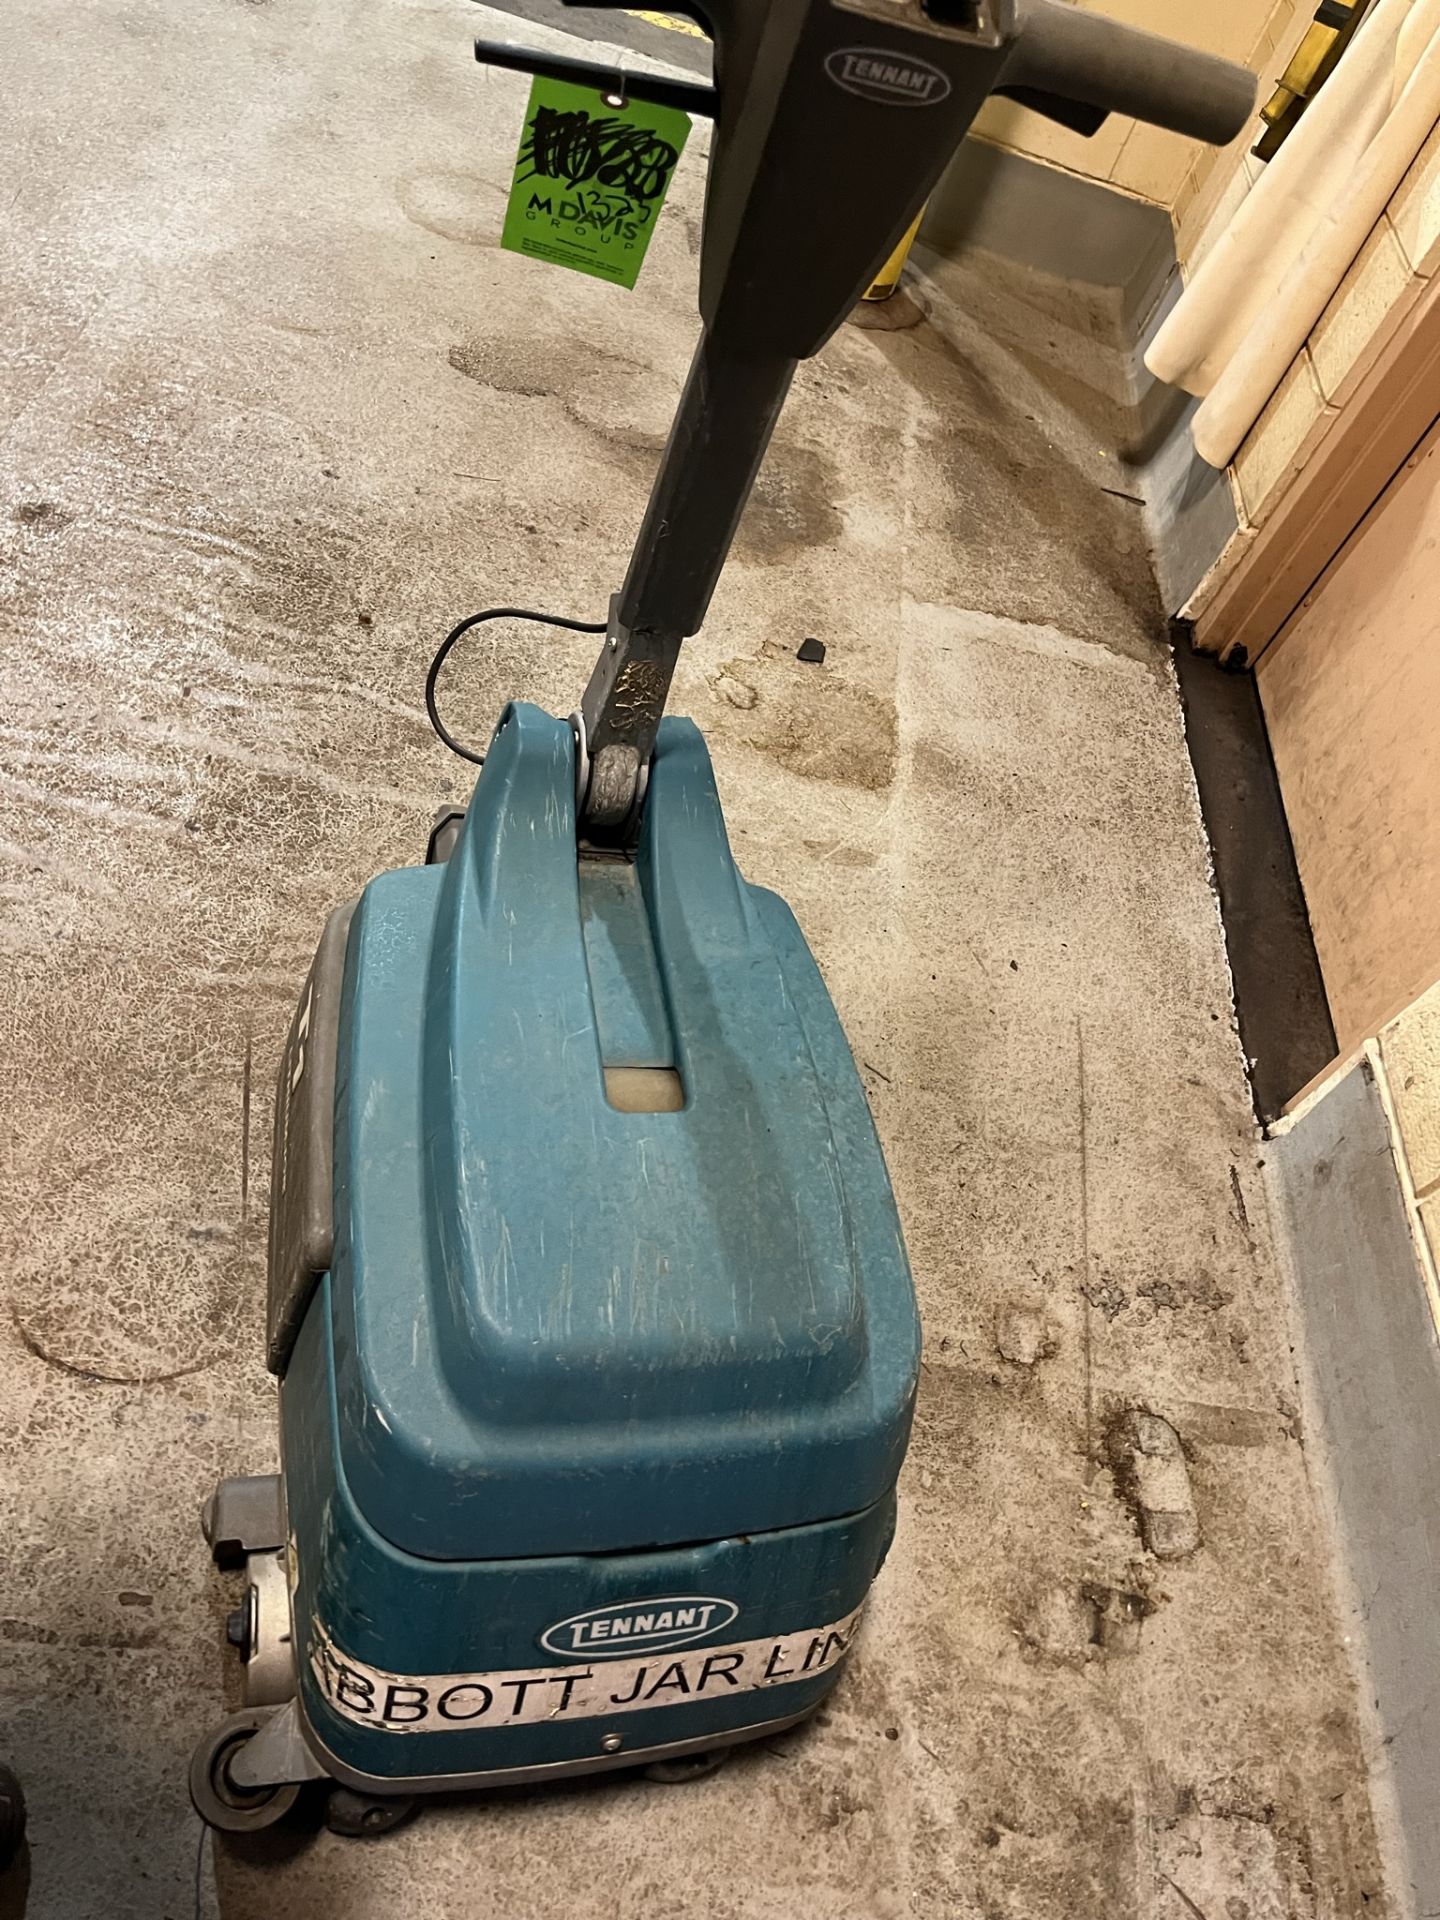 TENNANT T1 CORDED WALK BEHIND FLOOR SCRUBBER (Located Freehold, NJ) (Simple Loading Fee $137.50) - Image 5 of 6